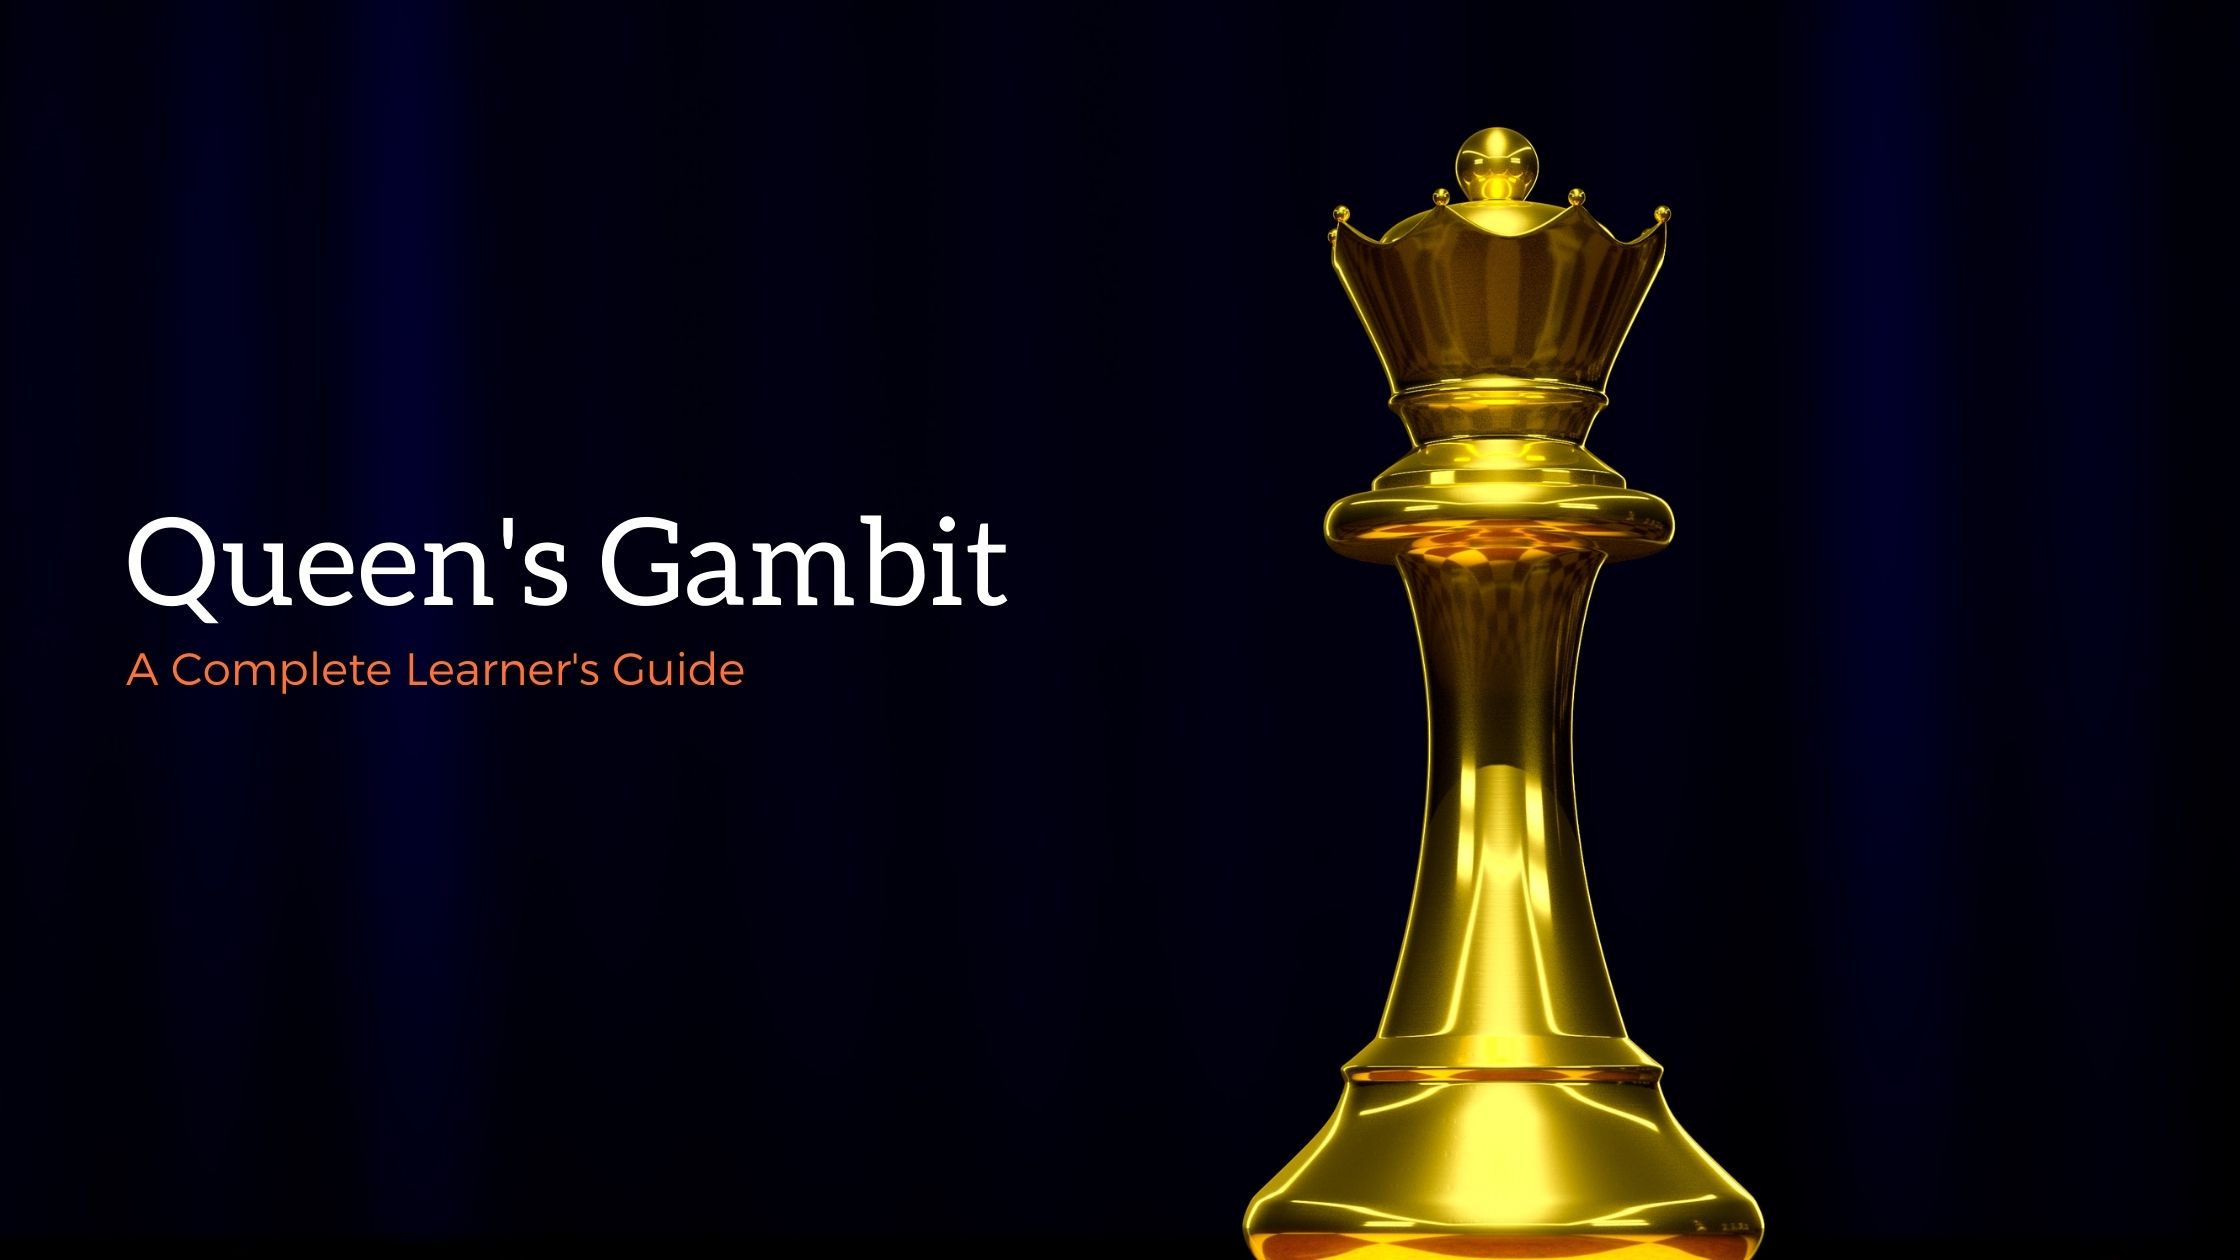 How To Play The Vienna Gambit - A Complete Guide For Beginners 